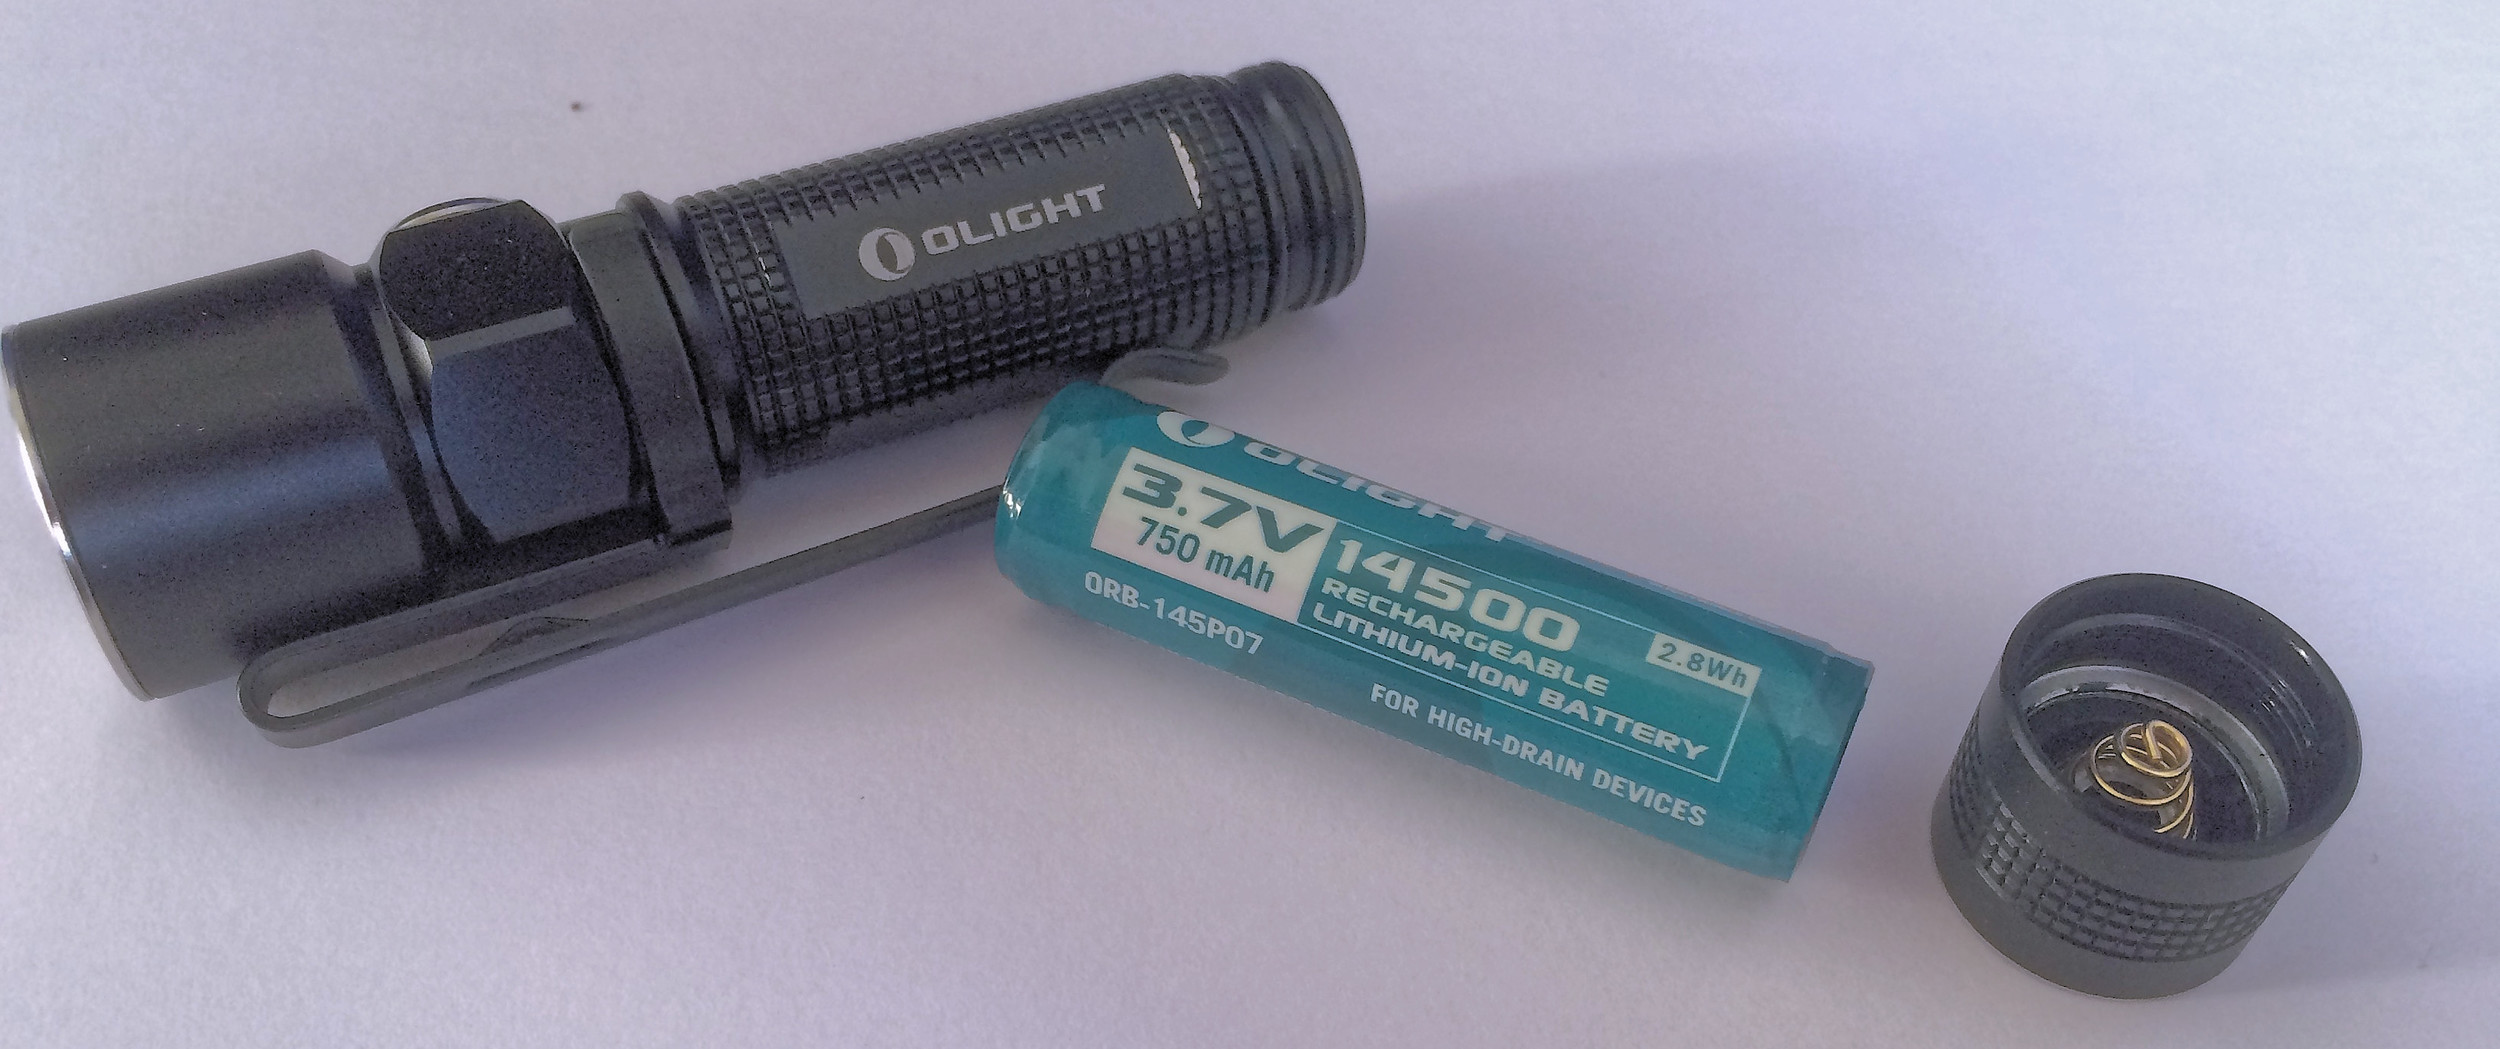 OLight S15R Baton rechargeable pocket flashlight review — Insights For  Success